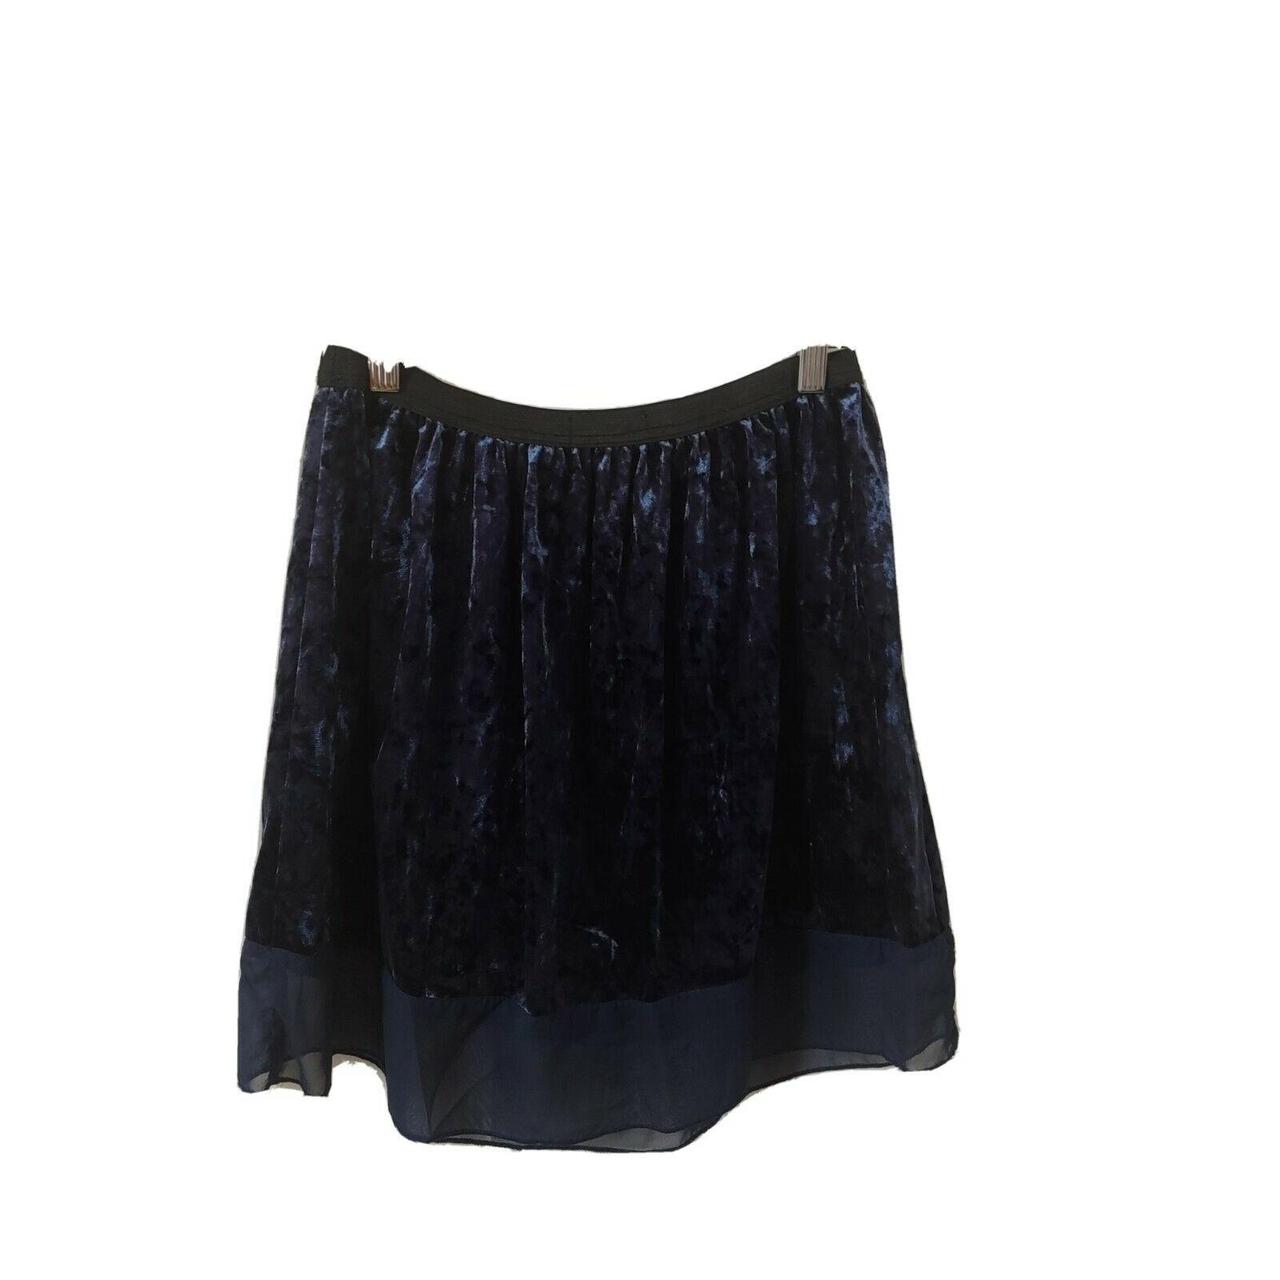 Product Image 2 - Lottie & Holly Womens Skirt